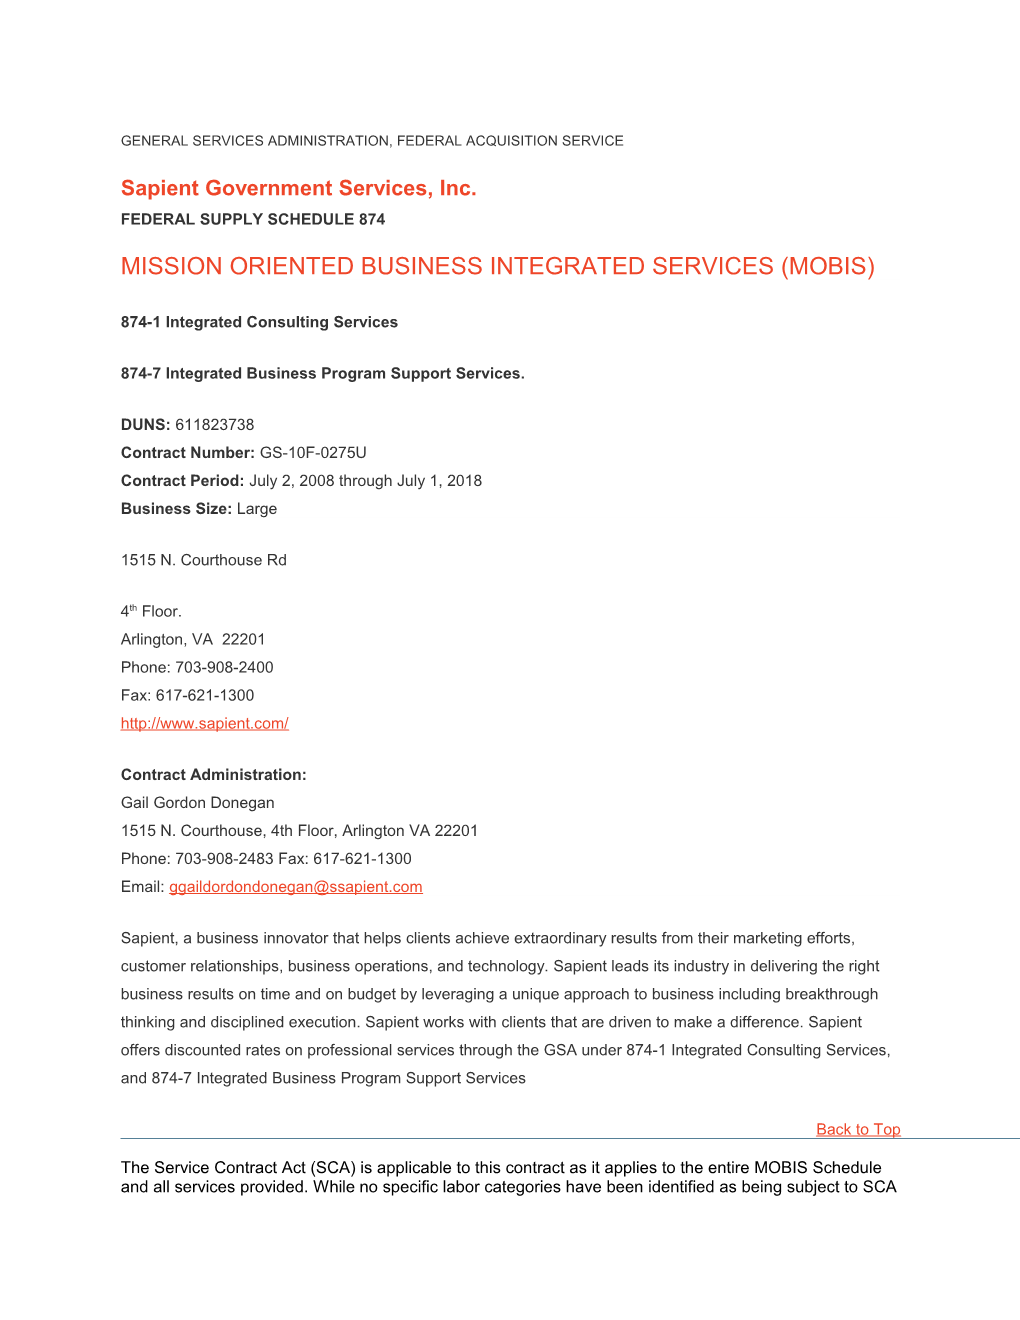 General Services Administration, Federal Acquisition Service